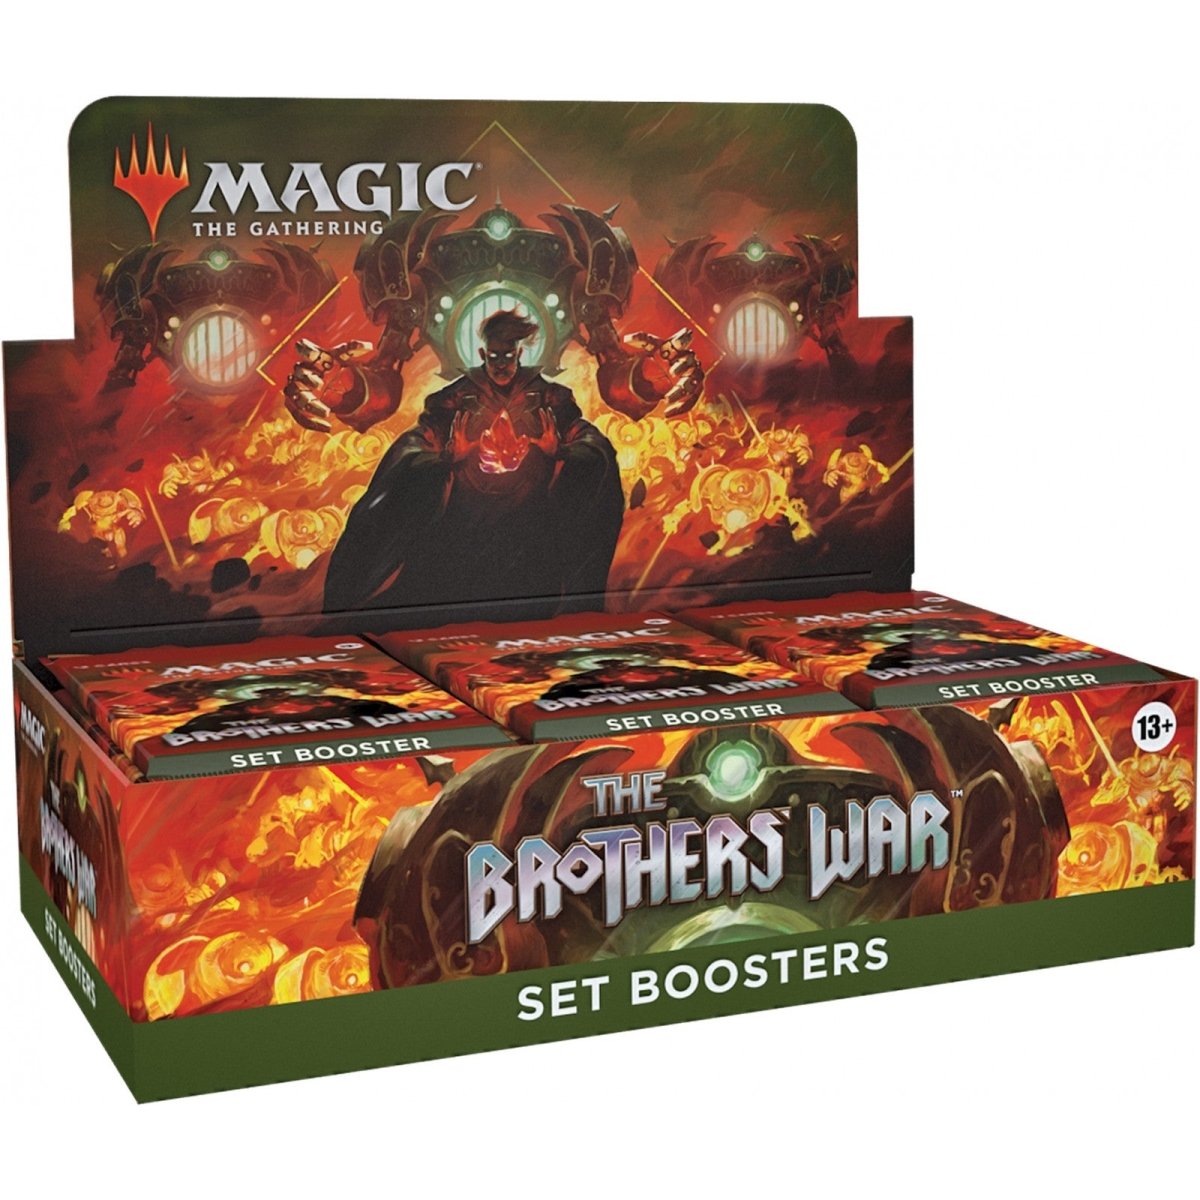 Magic the Gathering The Brothers War Set Booster Box   